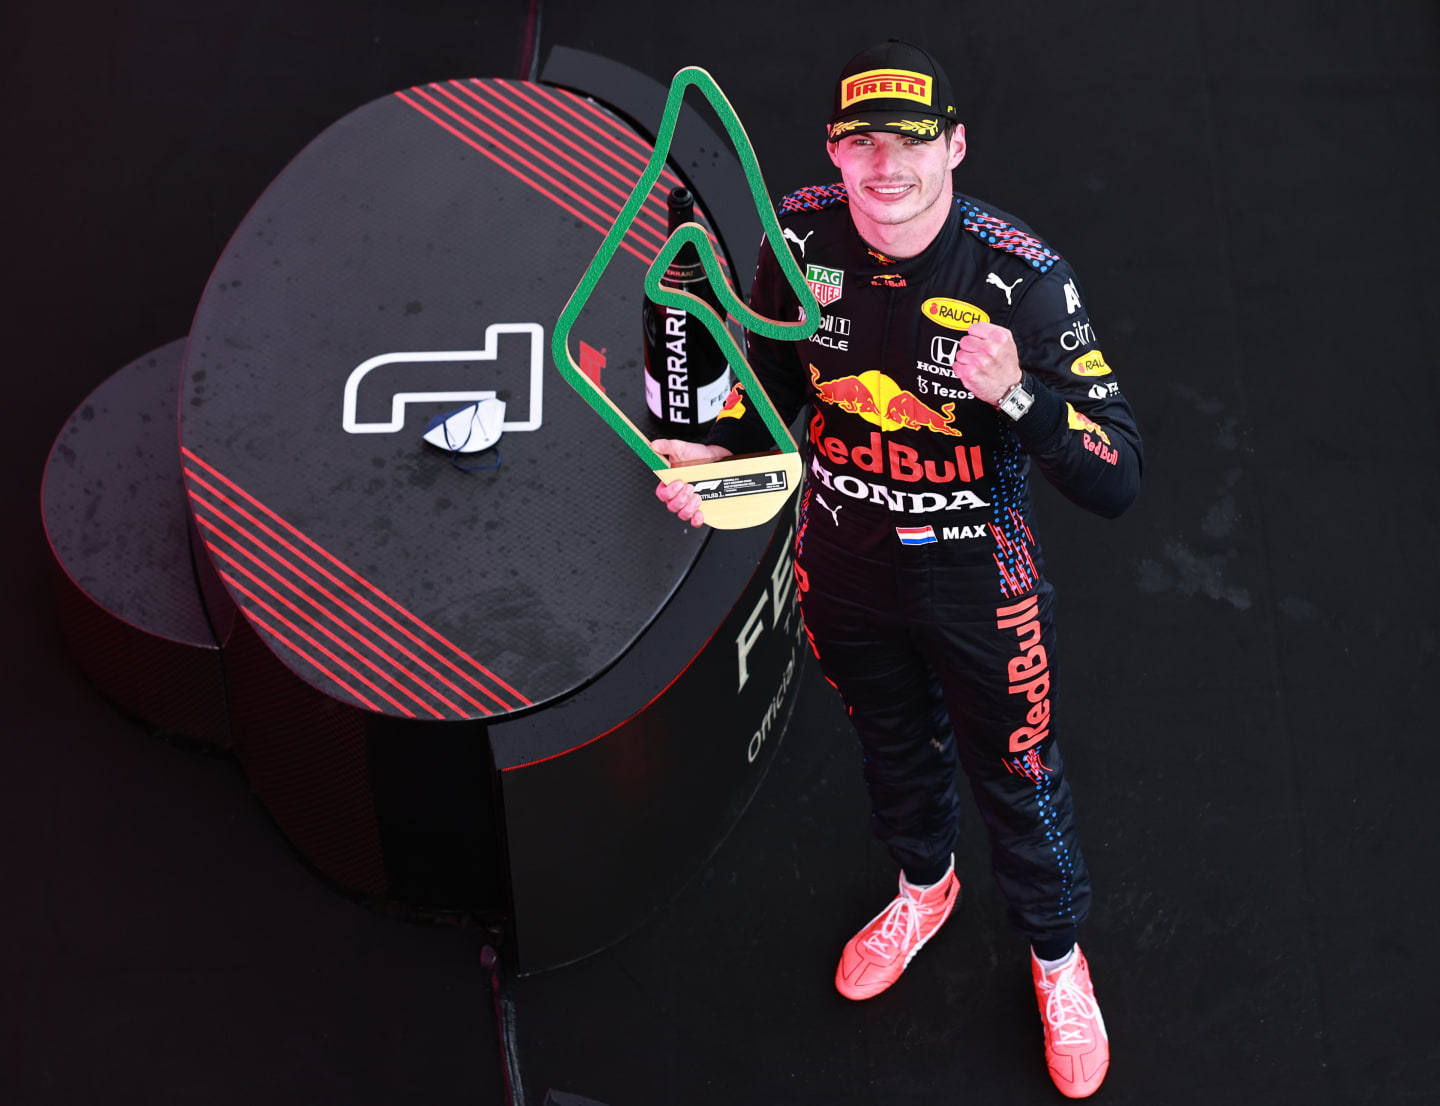 SPIELBERG, AUSTRIA - JUNE 27: Race winner Max Verstappen of Netherlands and Red Bull Racing celebrates on the podium during the F1 Grand Prix of Styria at Red Bull Ring on June 27, 2021 in Spielberg, Austria. (Photo by Mark Thompson/Getty Images)